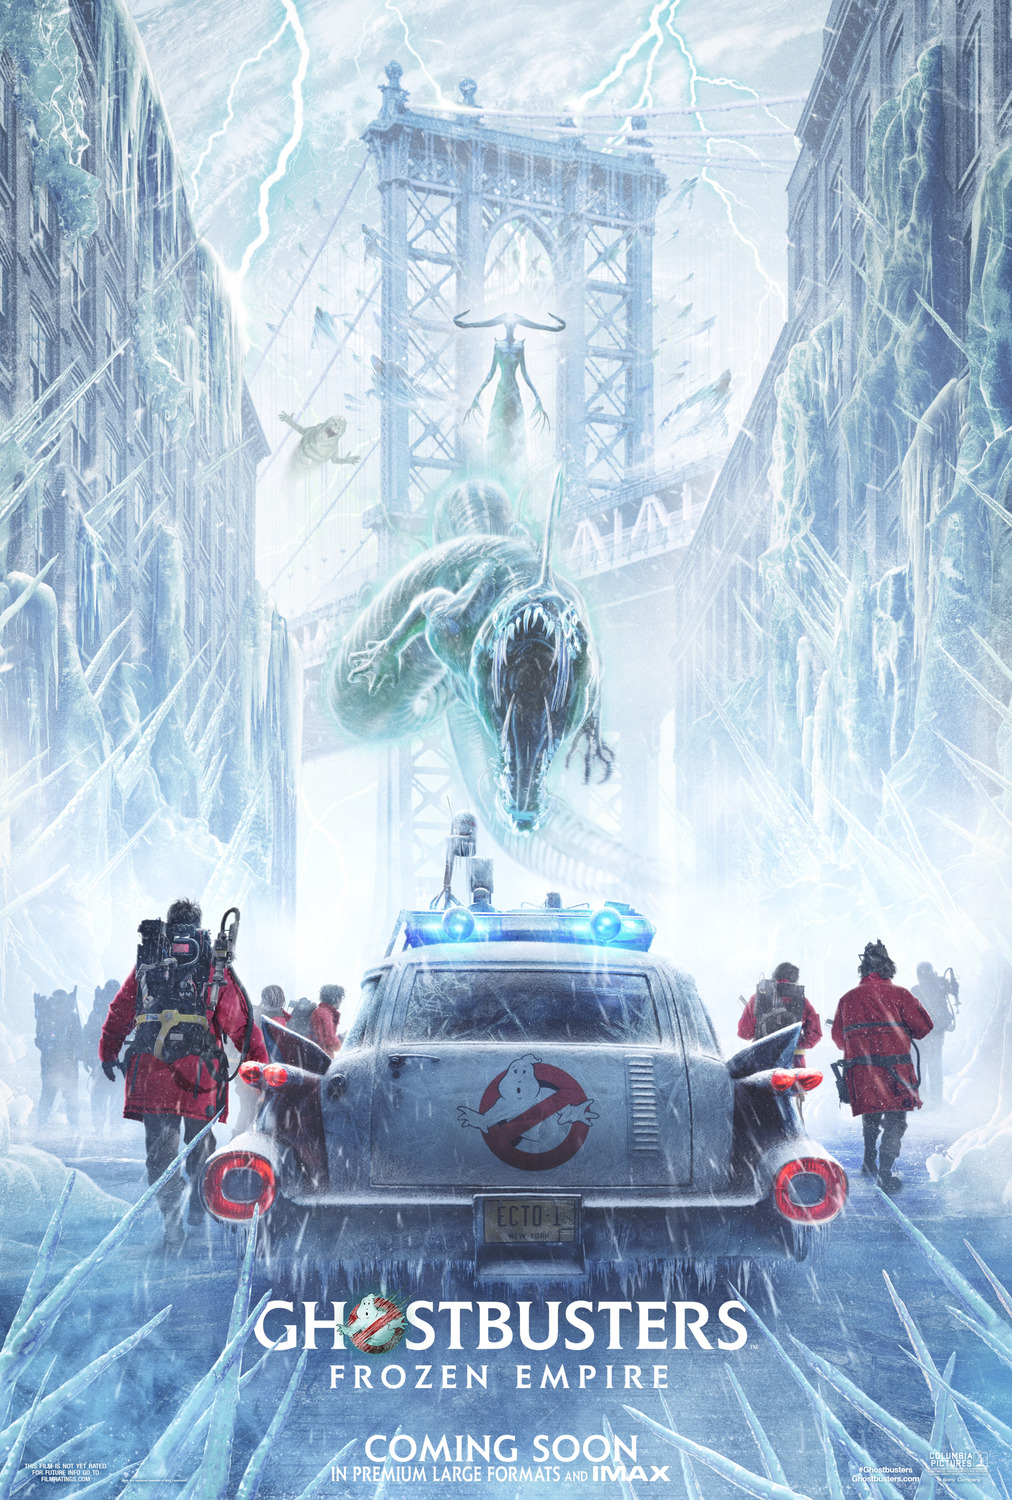 Ghostbusters: Frozen Empire review – One bust too many?